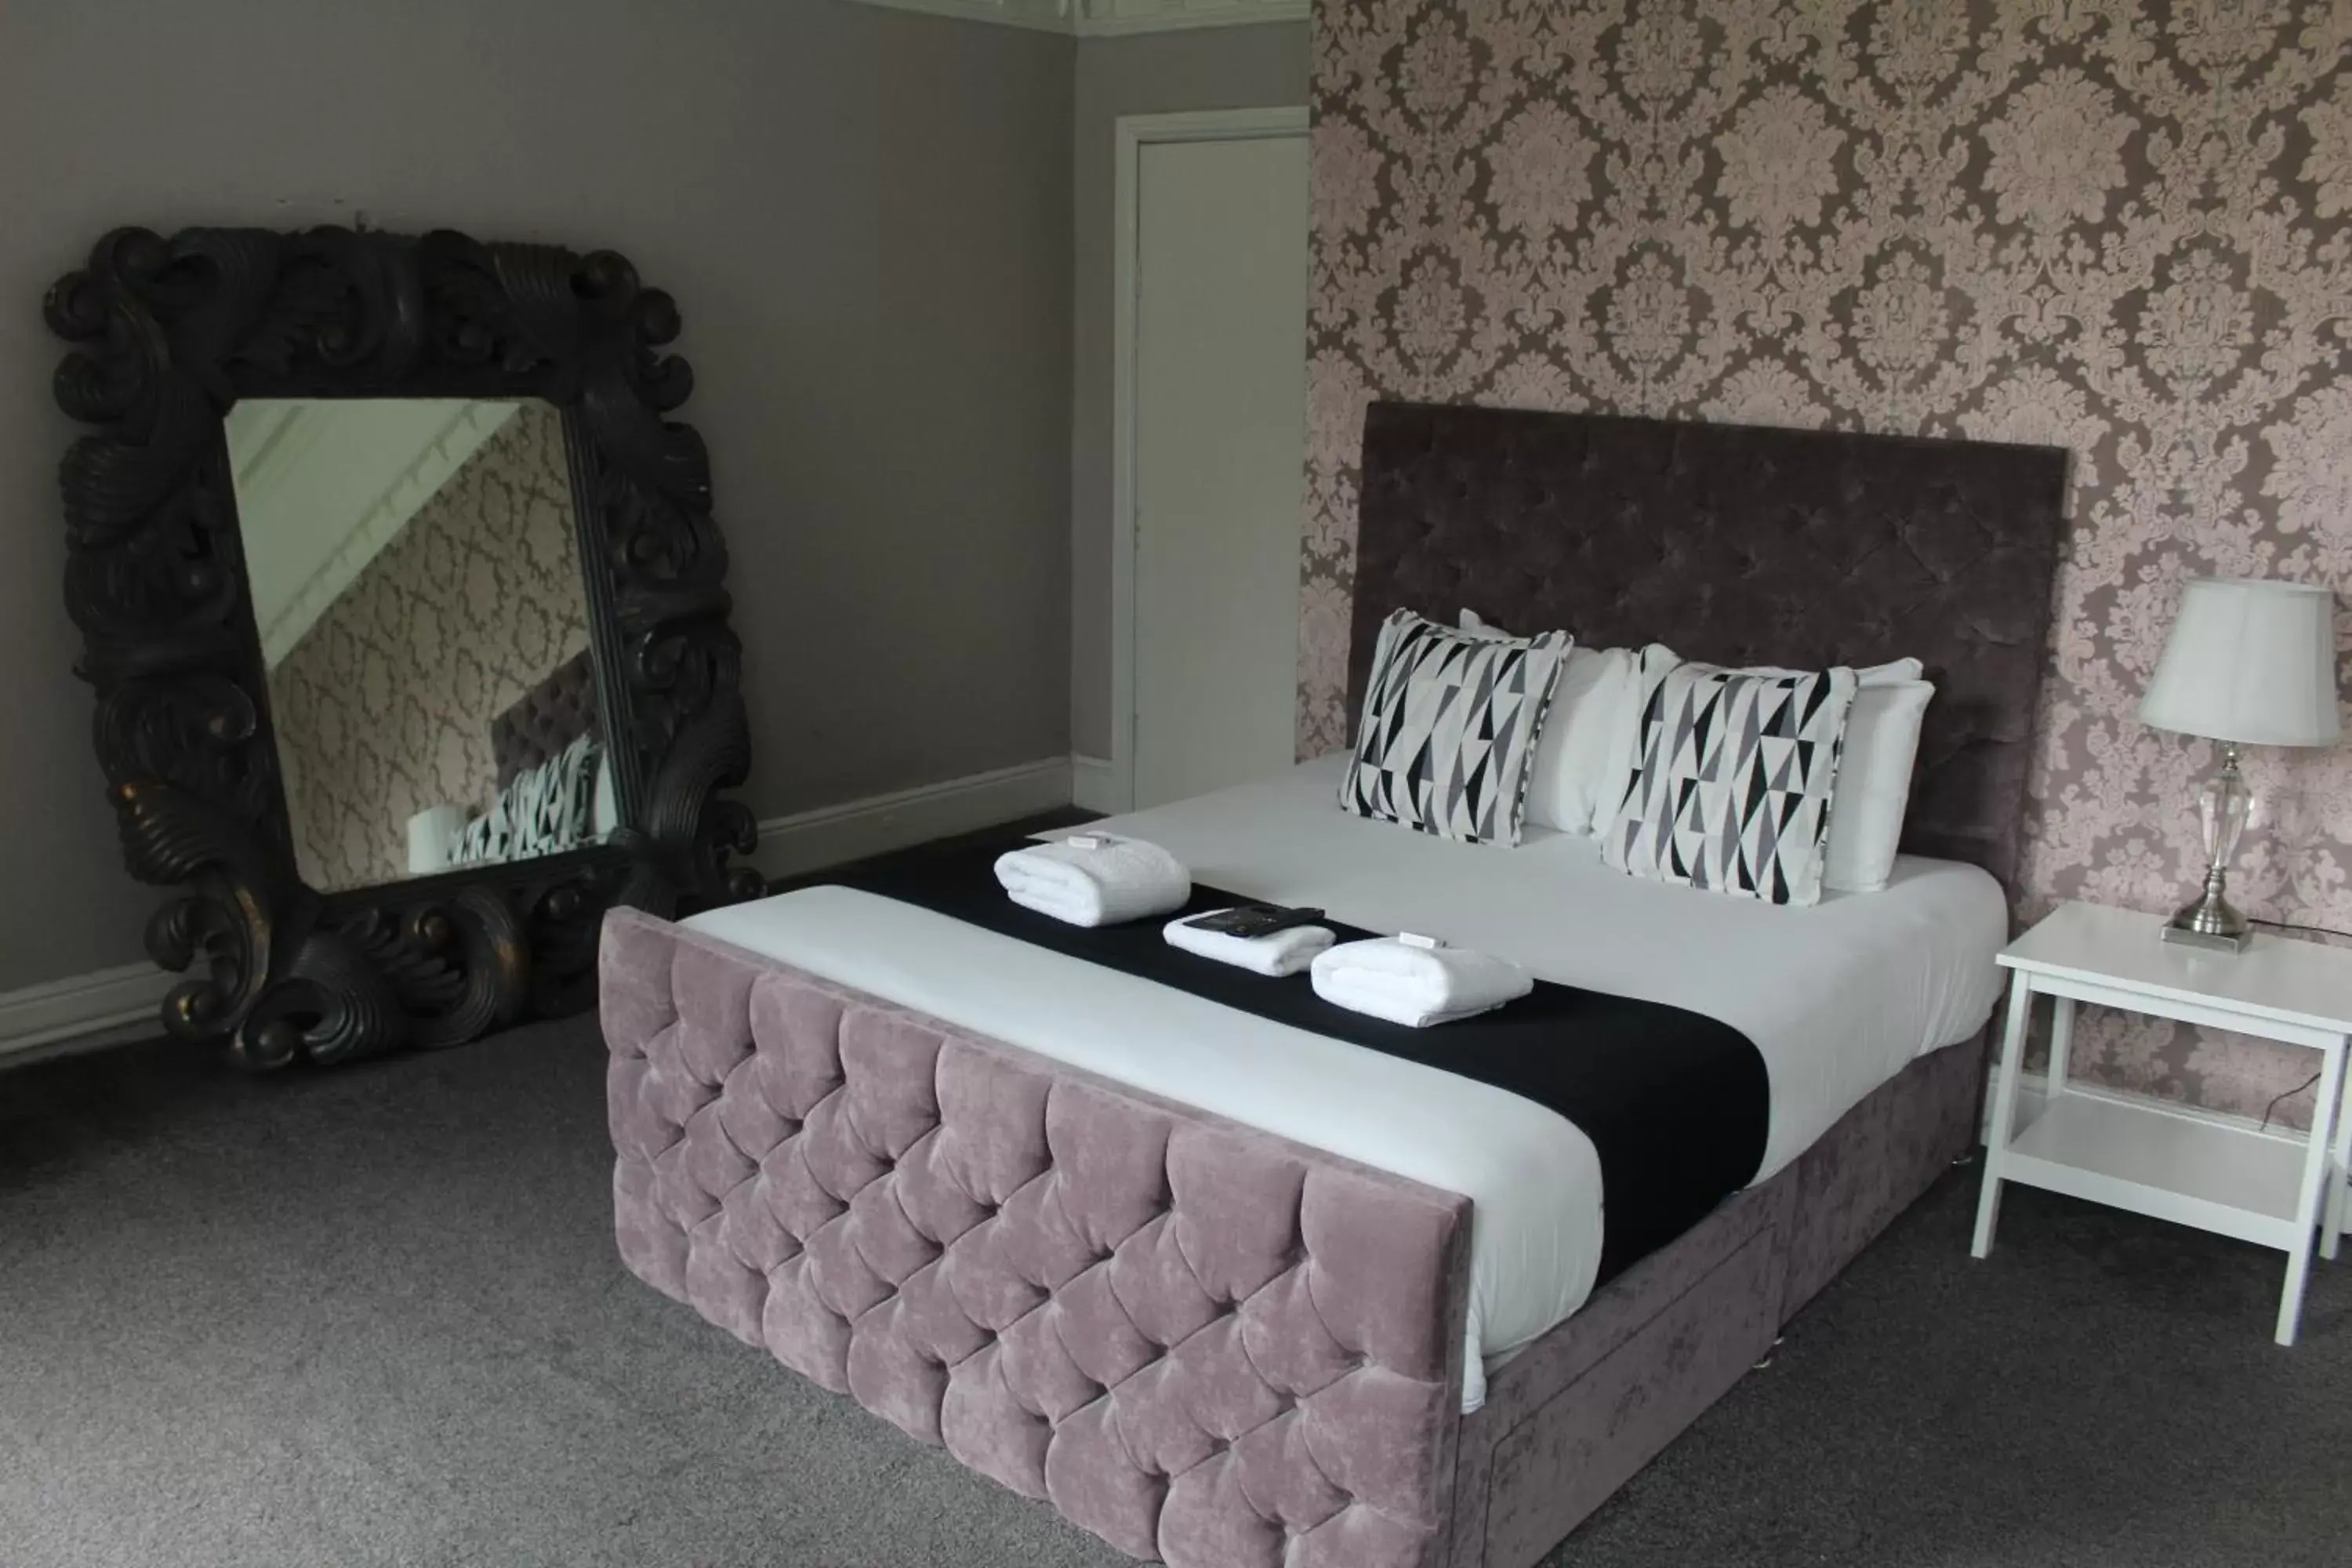 Bed in The Mitre Hotel